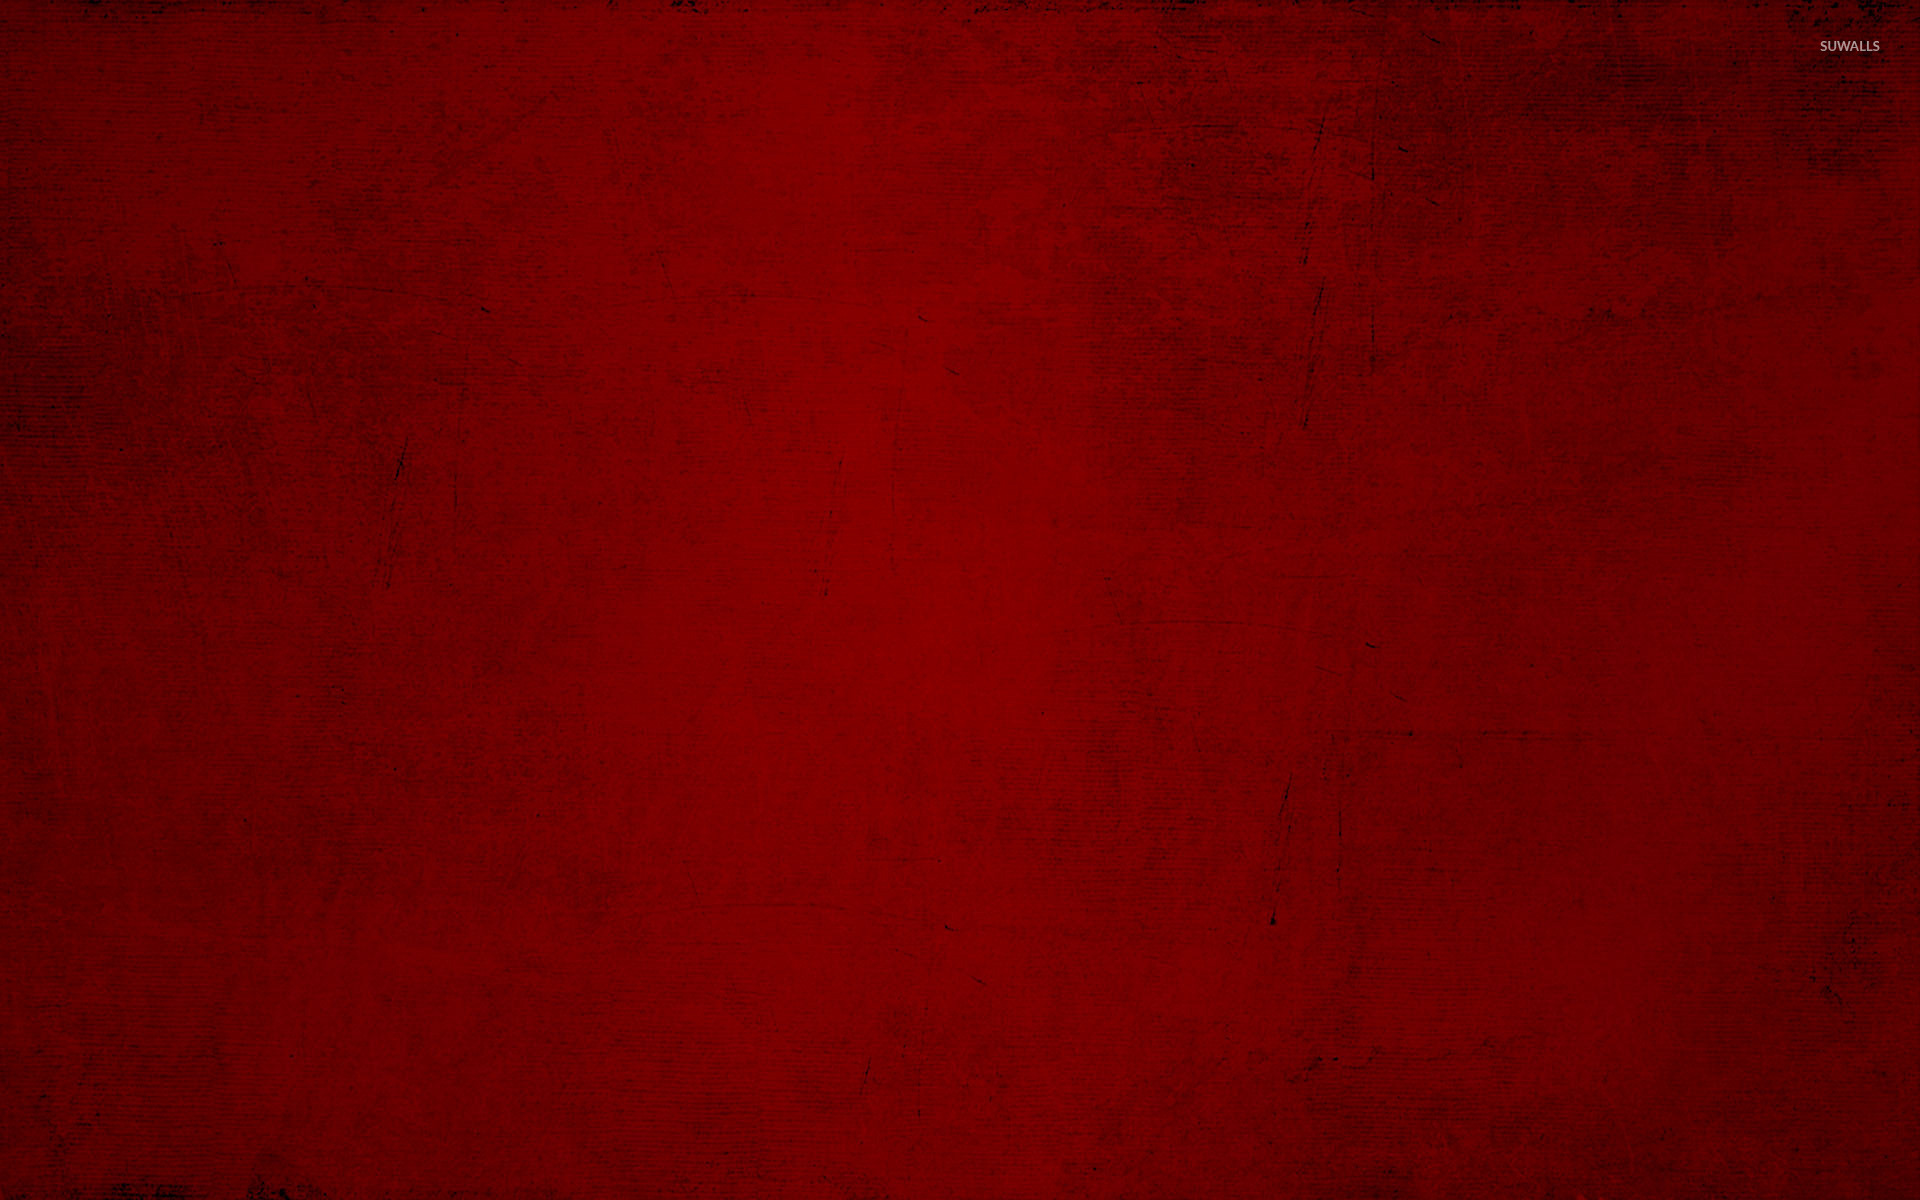 Grunge red wall wallpaper - Abstract wallpapers - #16453